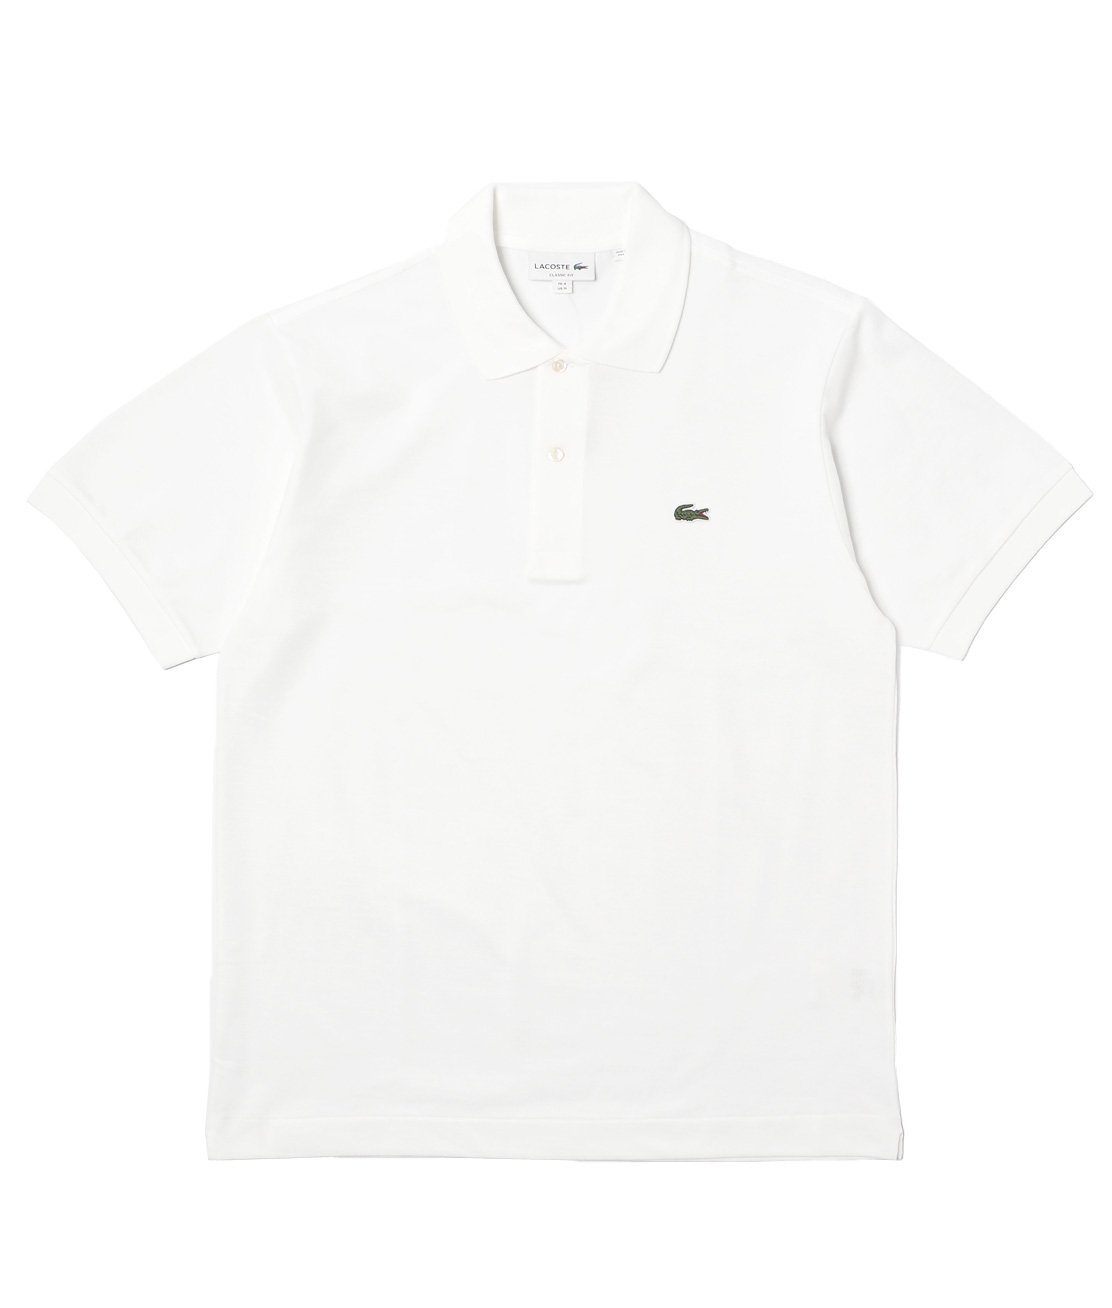 LACOSTE】L1212 S/S CLASSIC PIQUET POLO - ポロシャツ ラコステ 並行輸入品 - HUNKY DORY